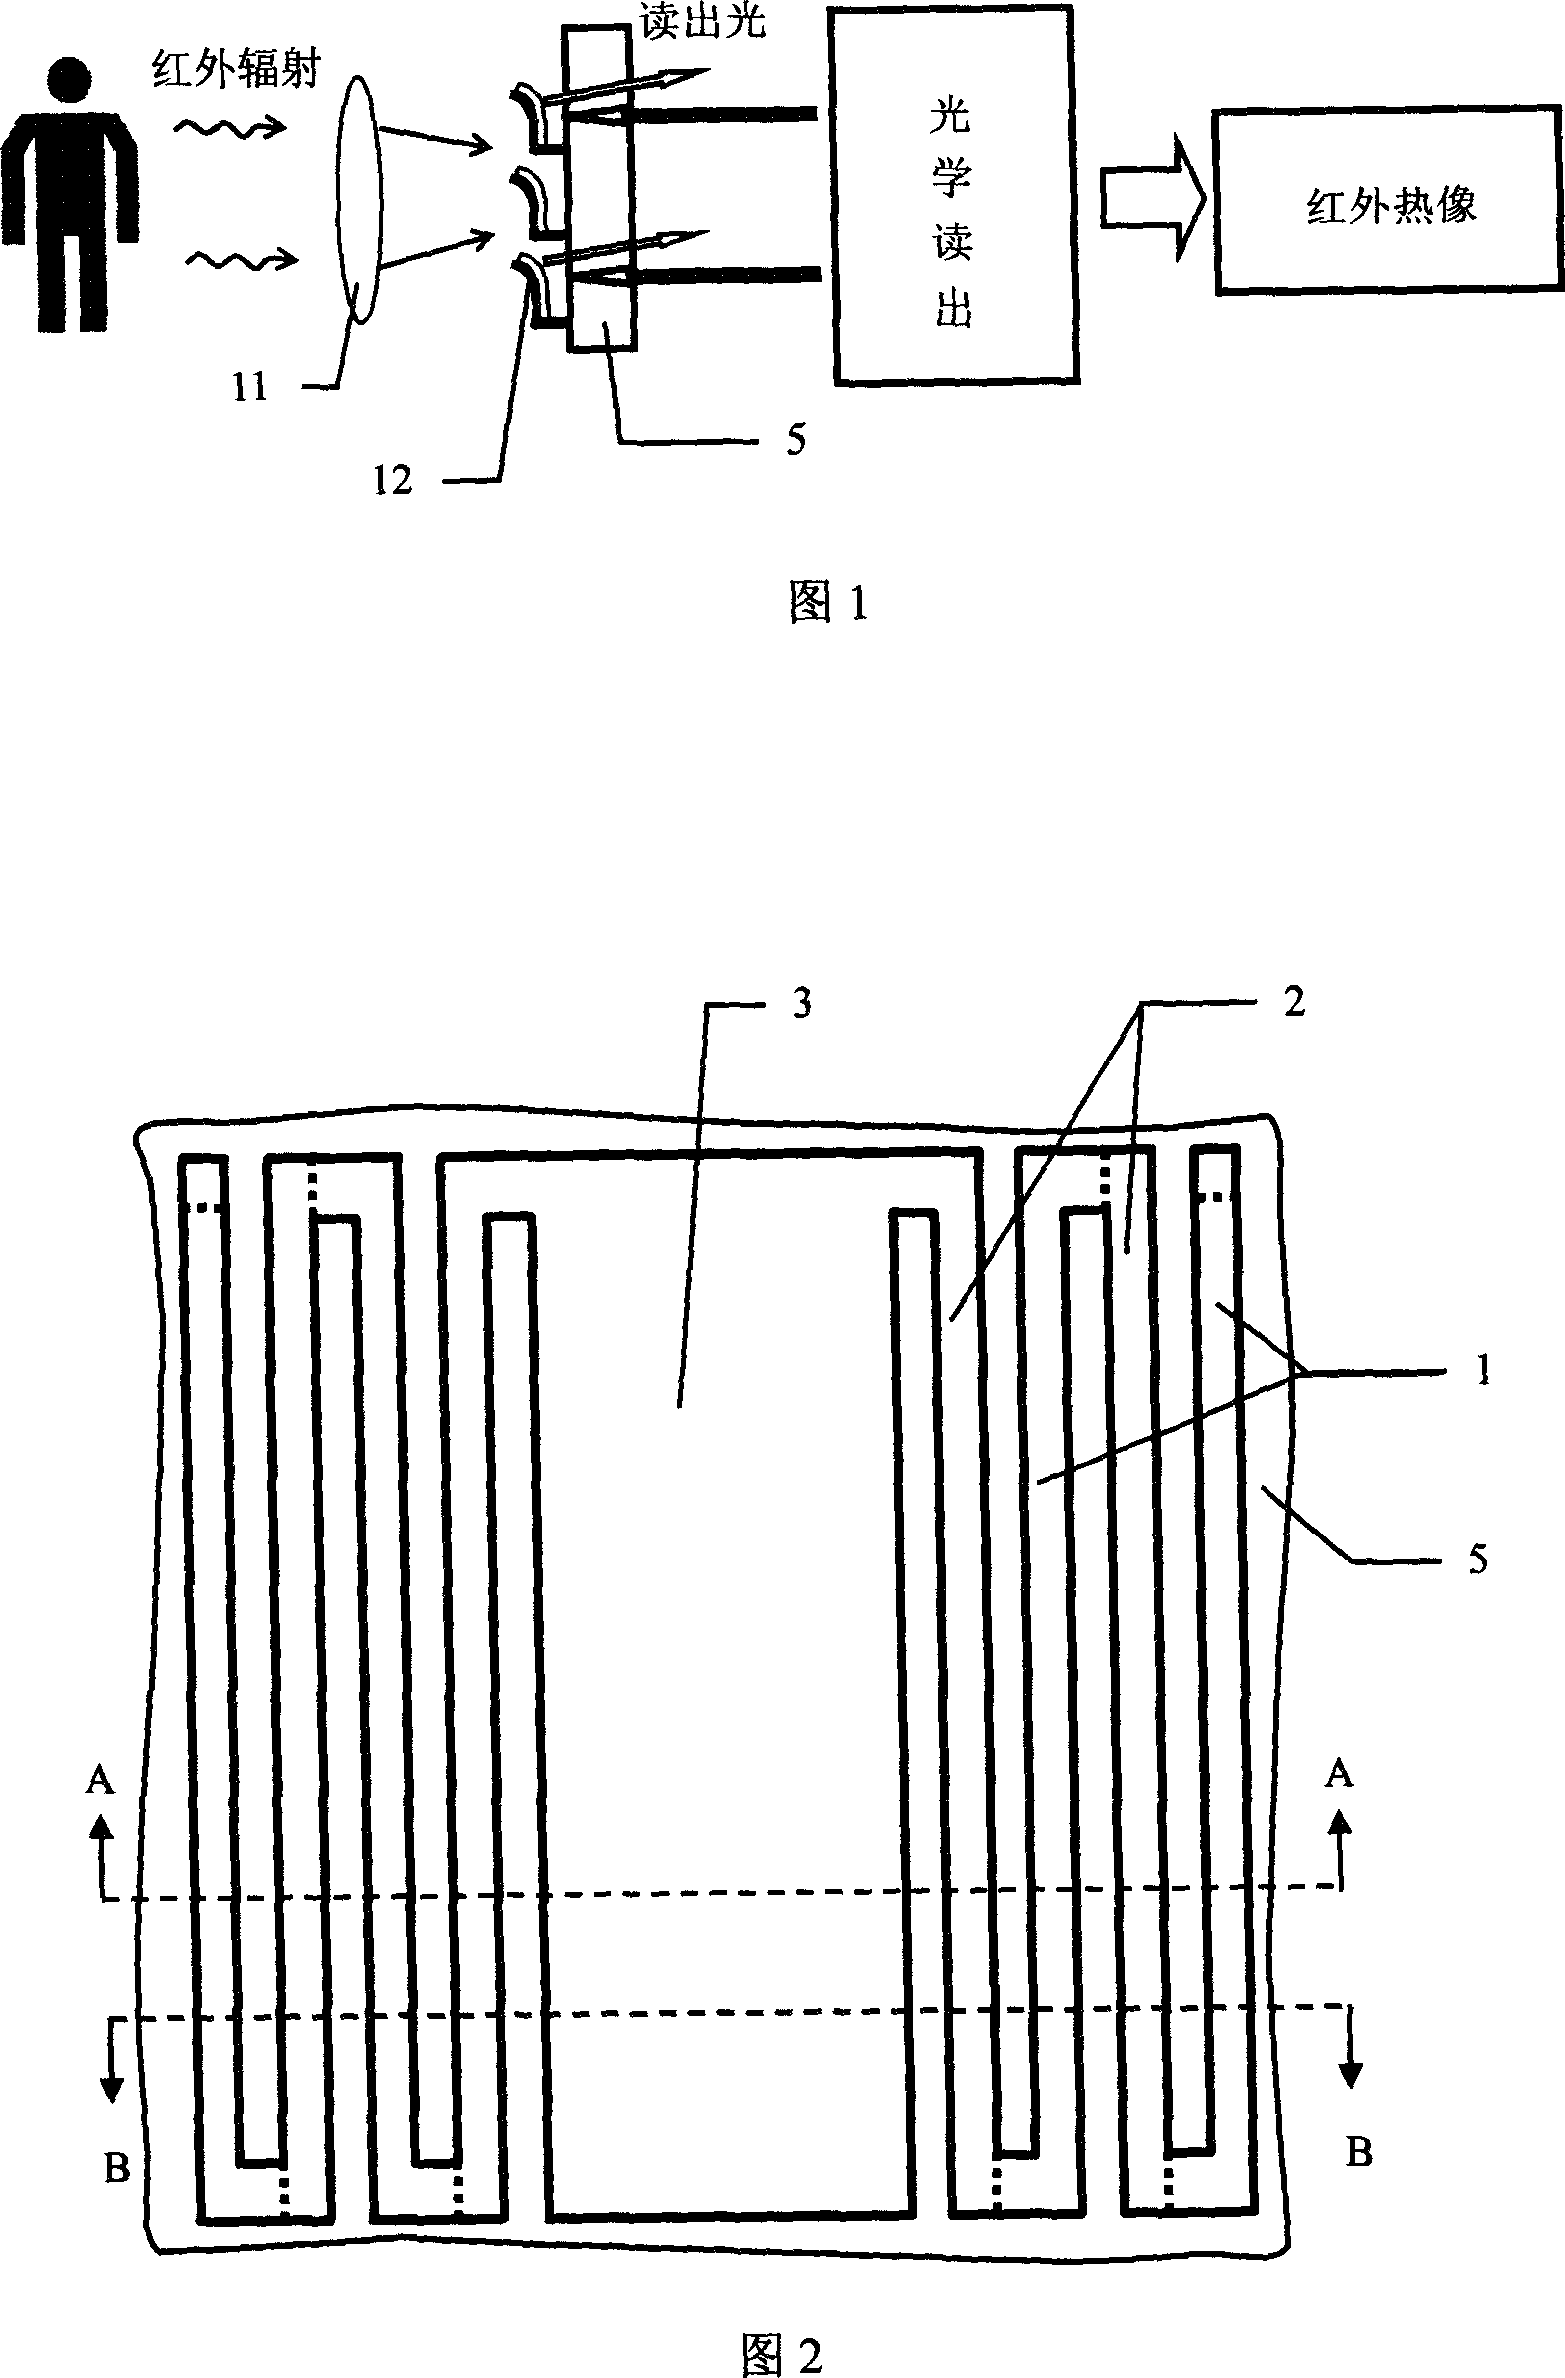 Glass substrate optical display infra-red sensor